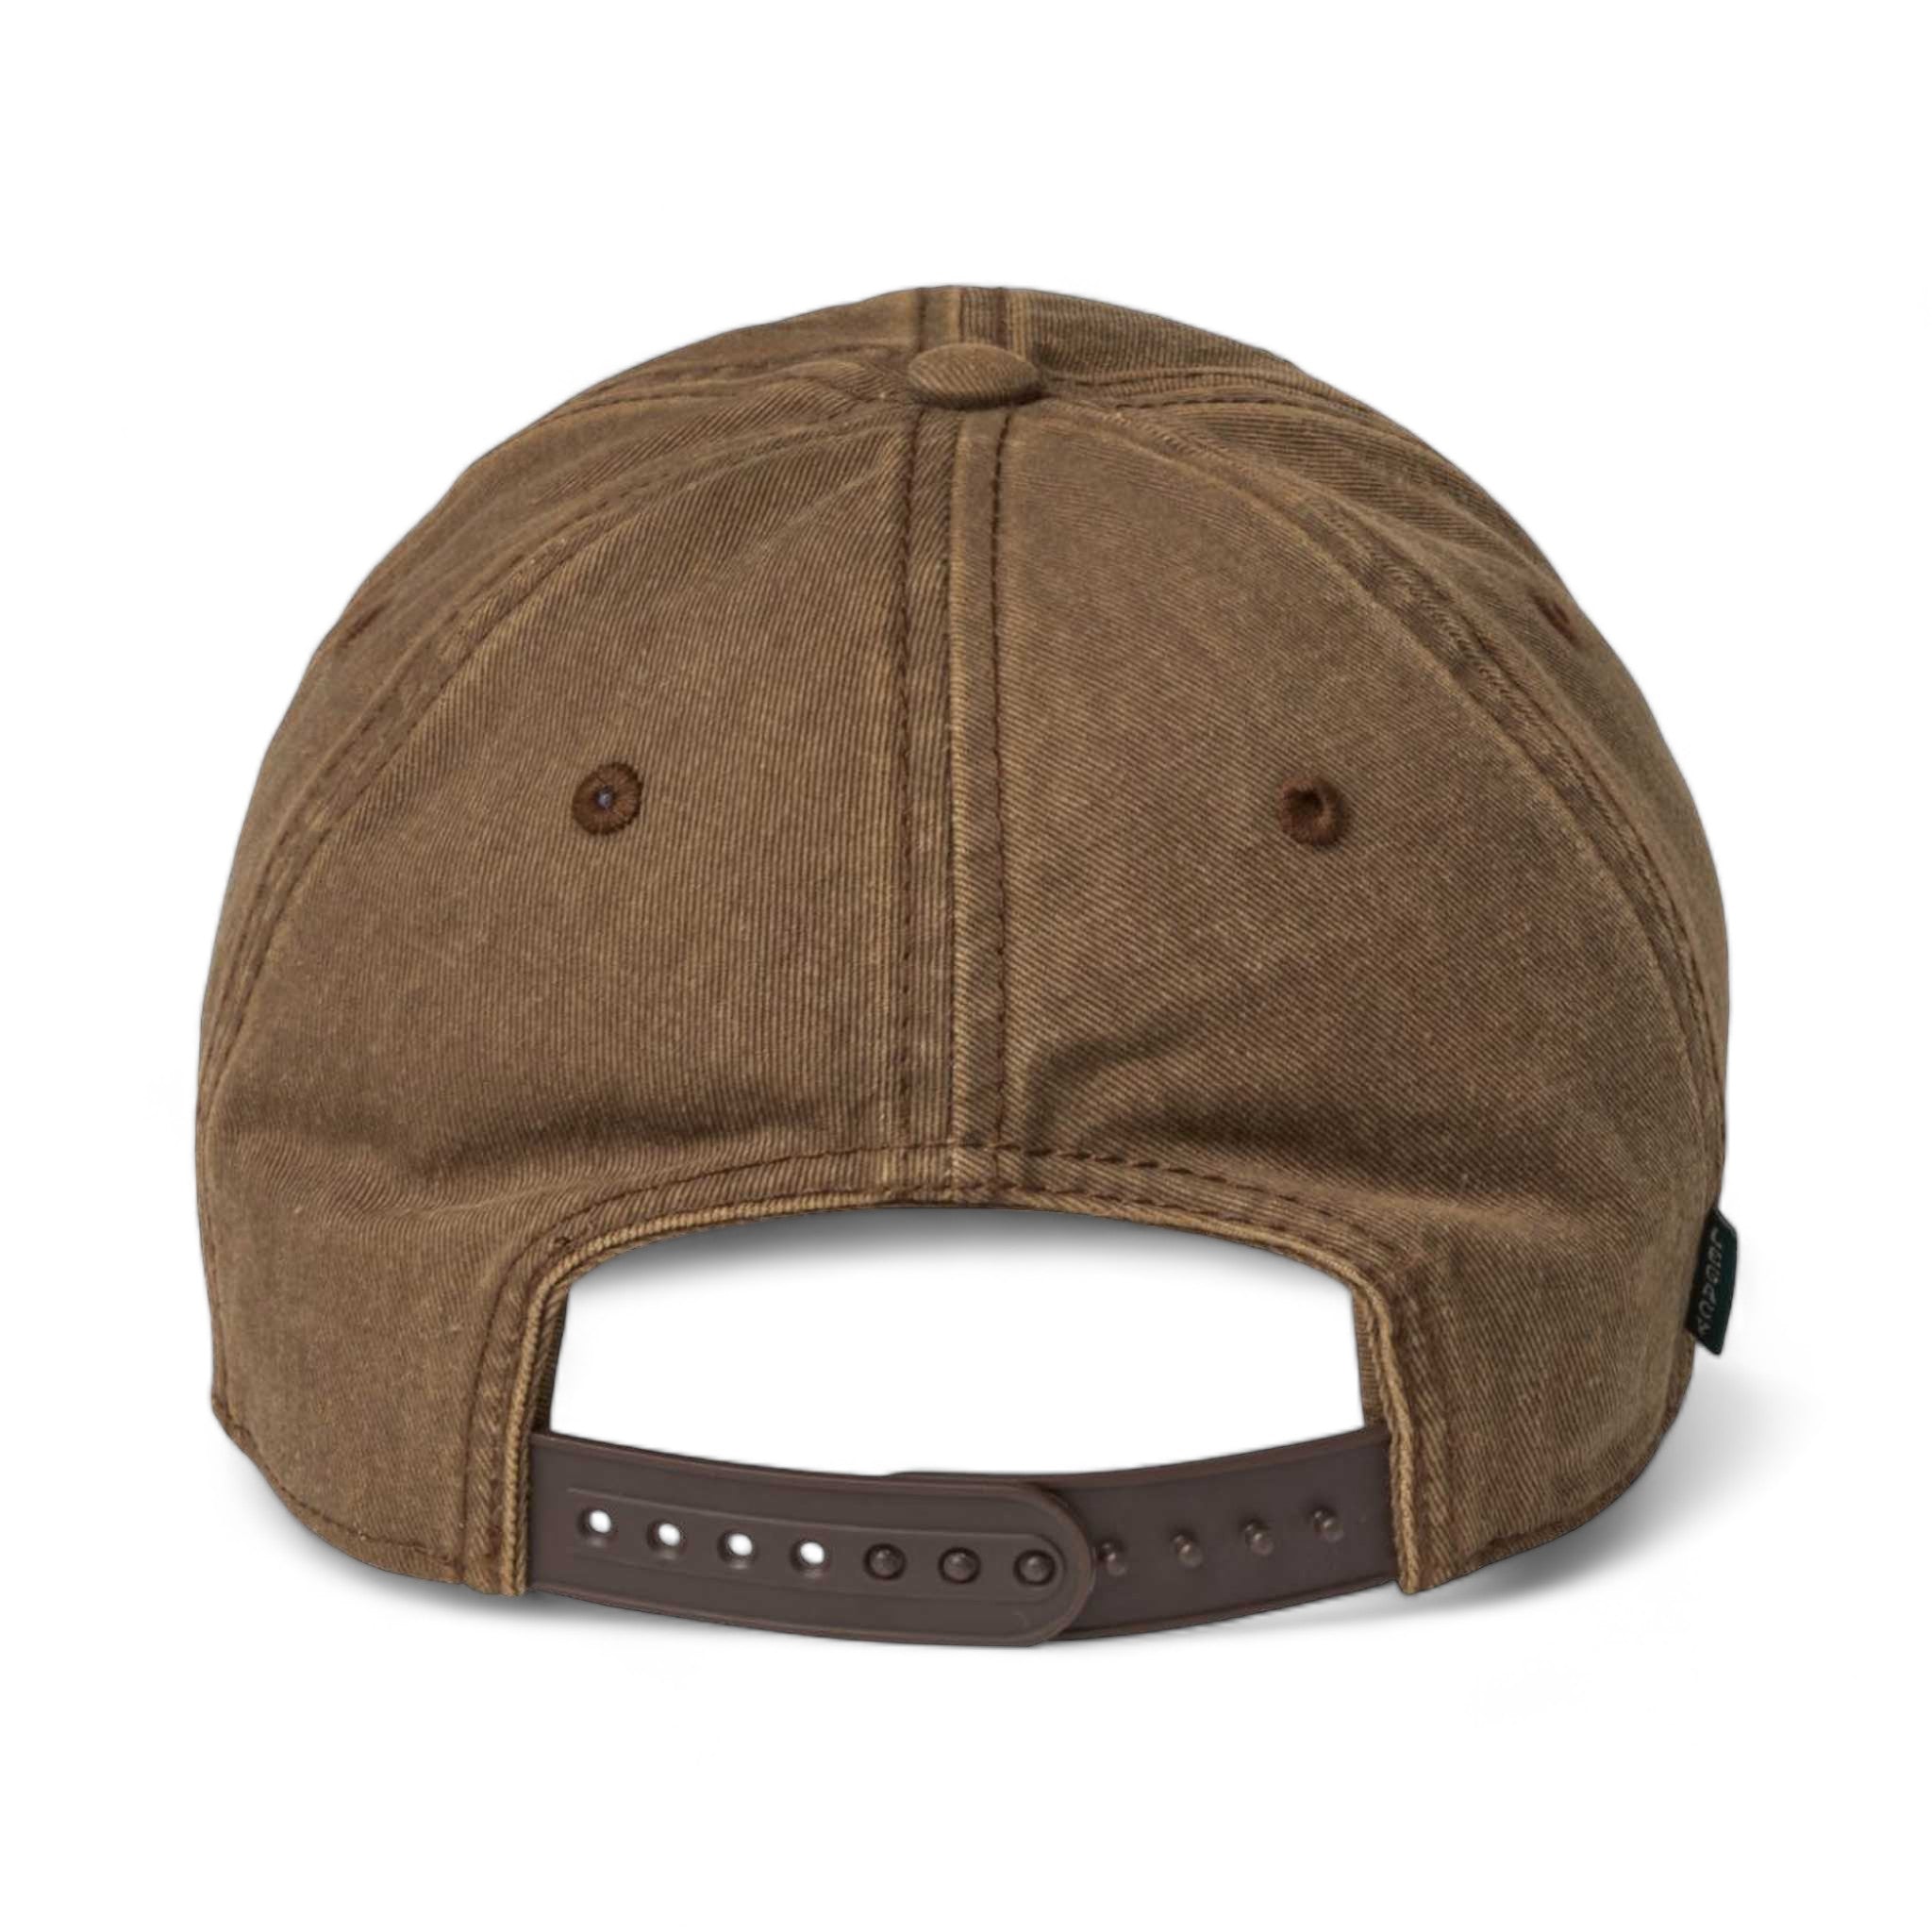 Back view of LEGACY OFAST custom hat in brown